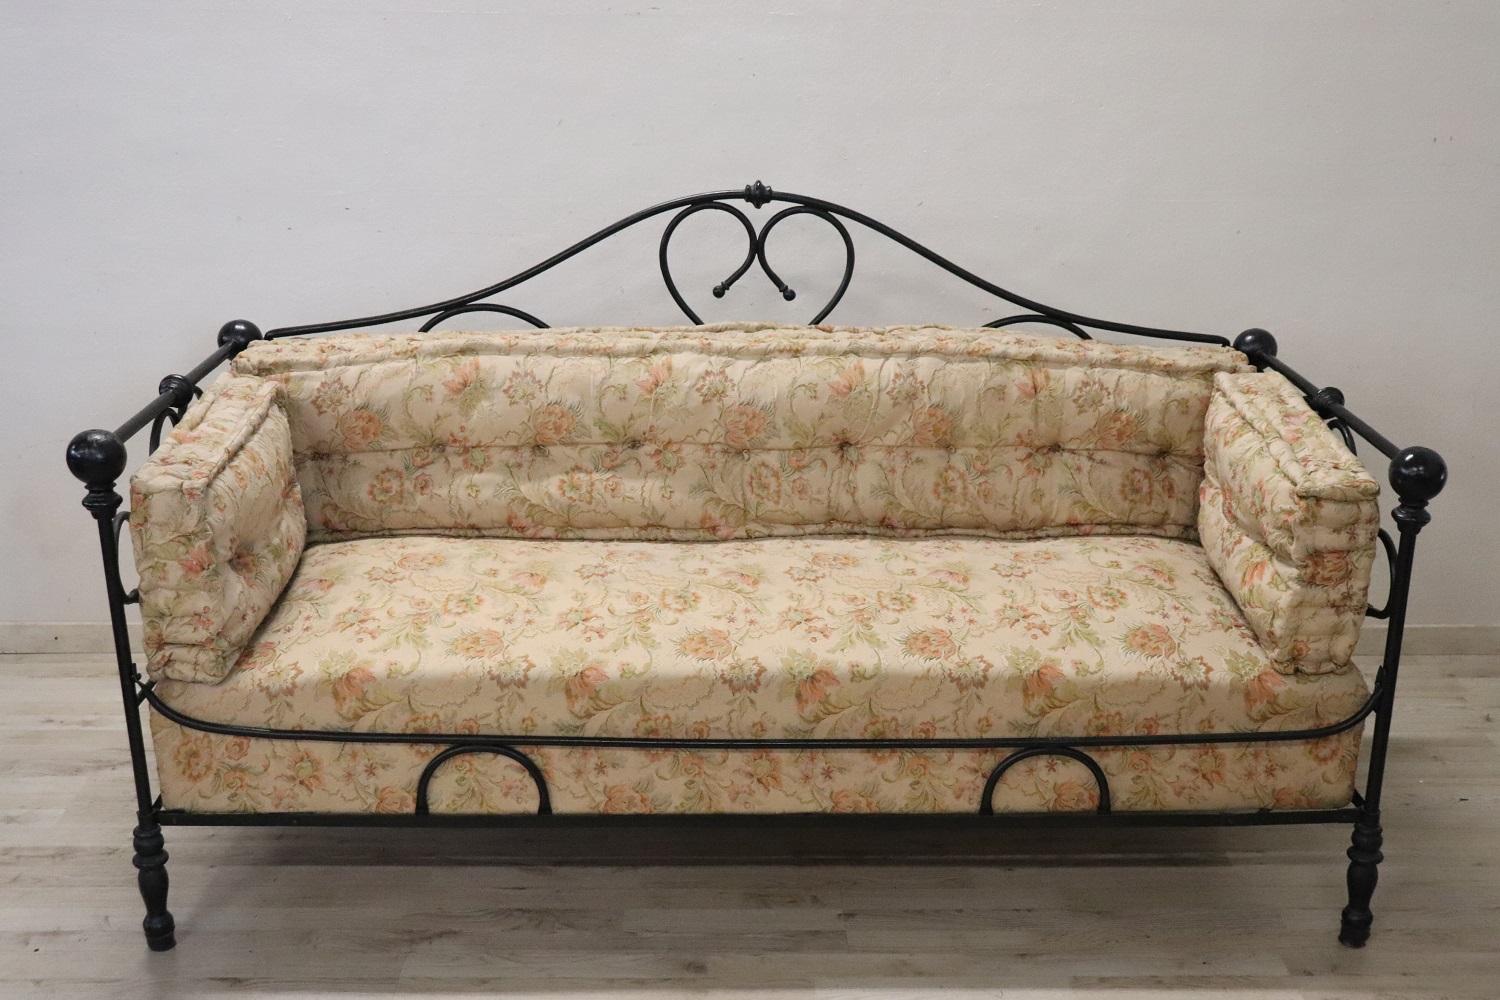 Rare italian antique large settee, late 19th century. The settee is made of solid iron. The iron has a refined and elaborate decoration with curls and scrolls. The decoration is present on each side so it is possible to place the settee also in the